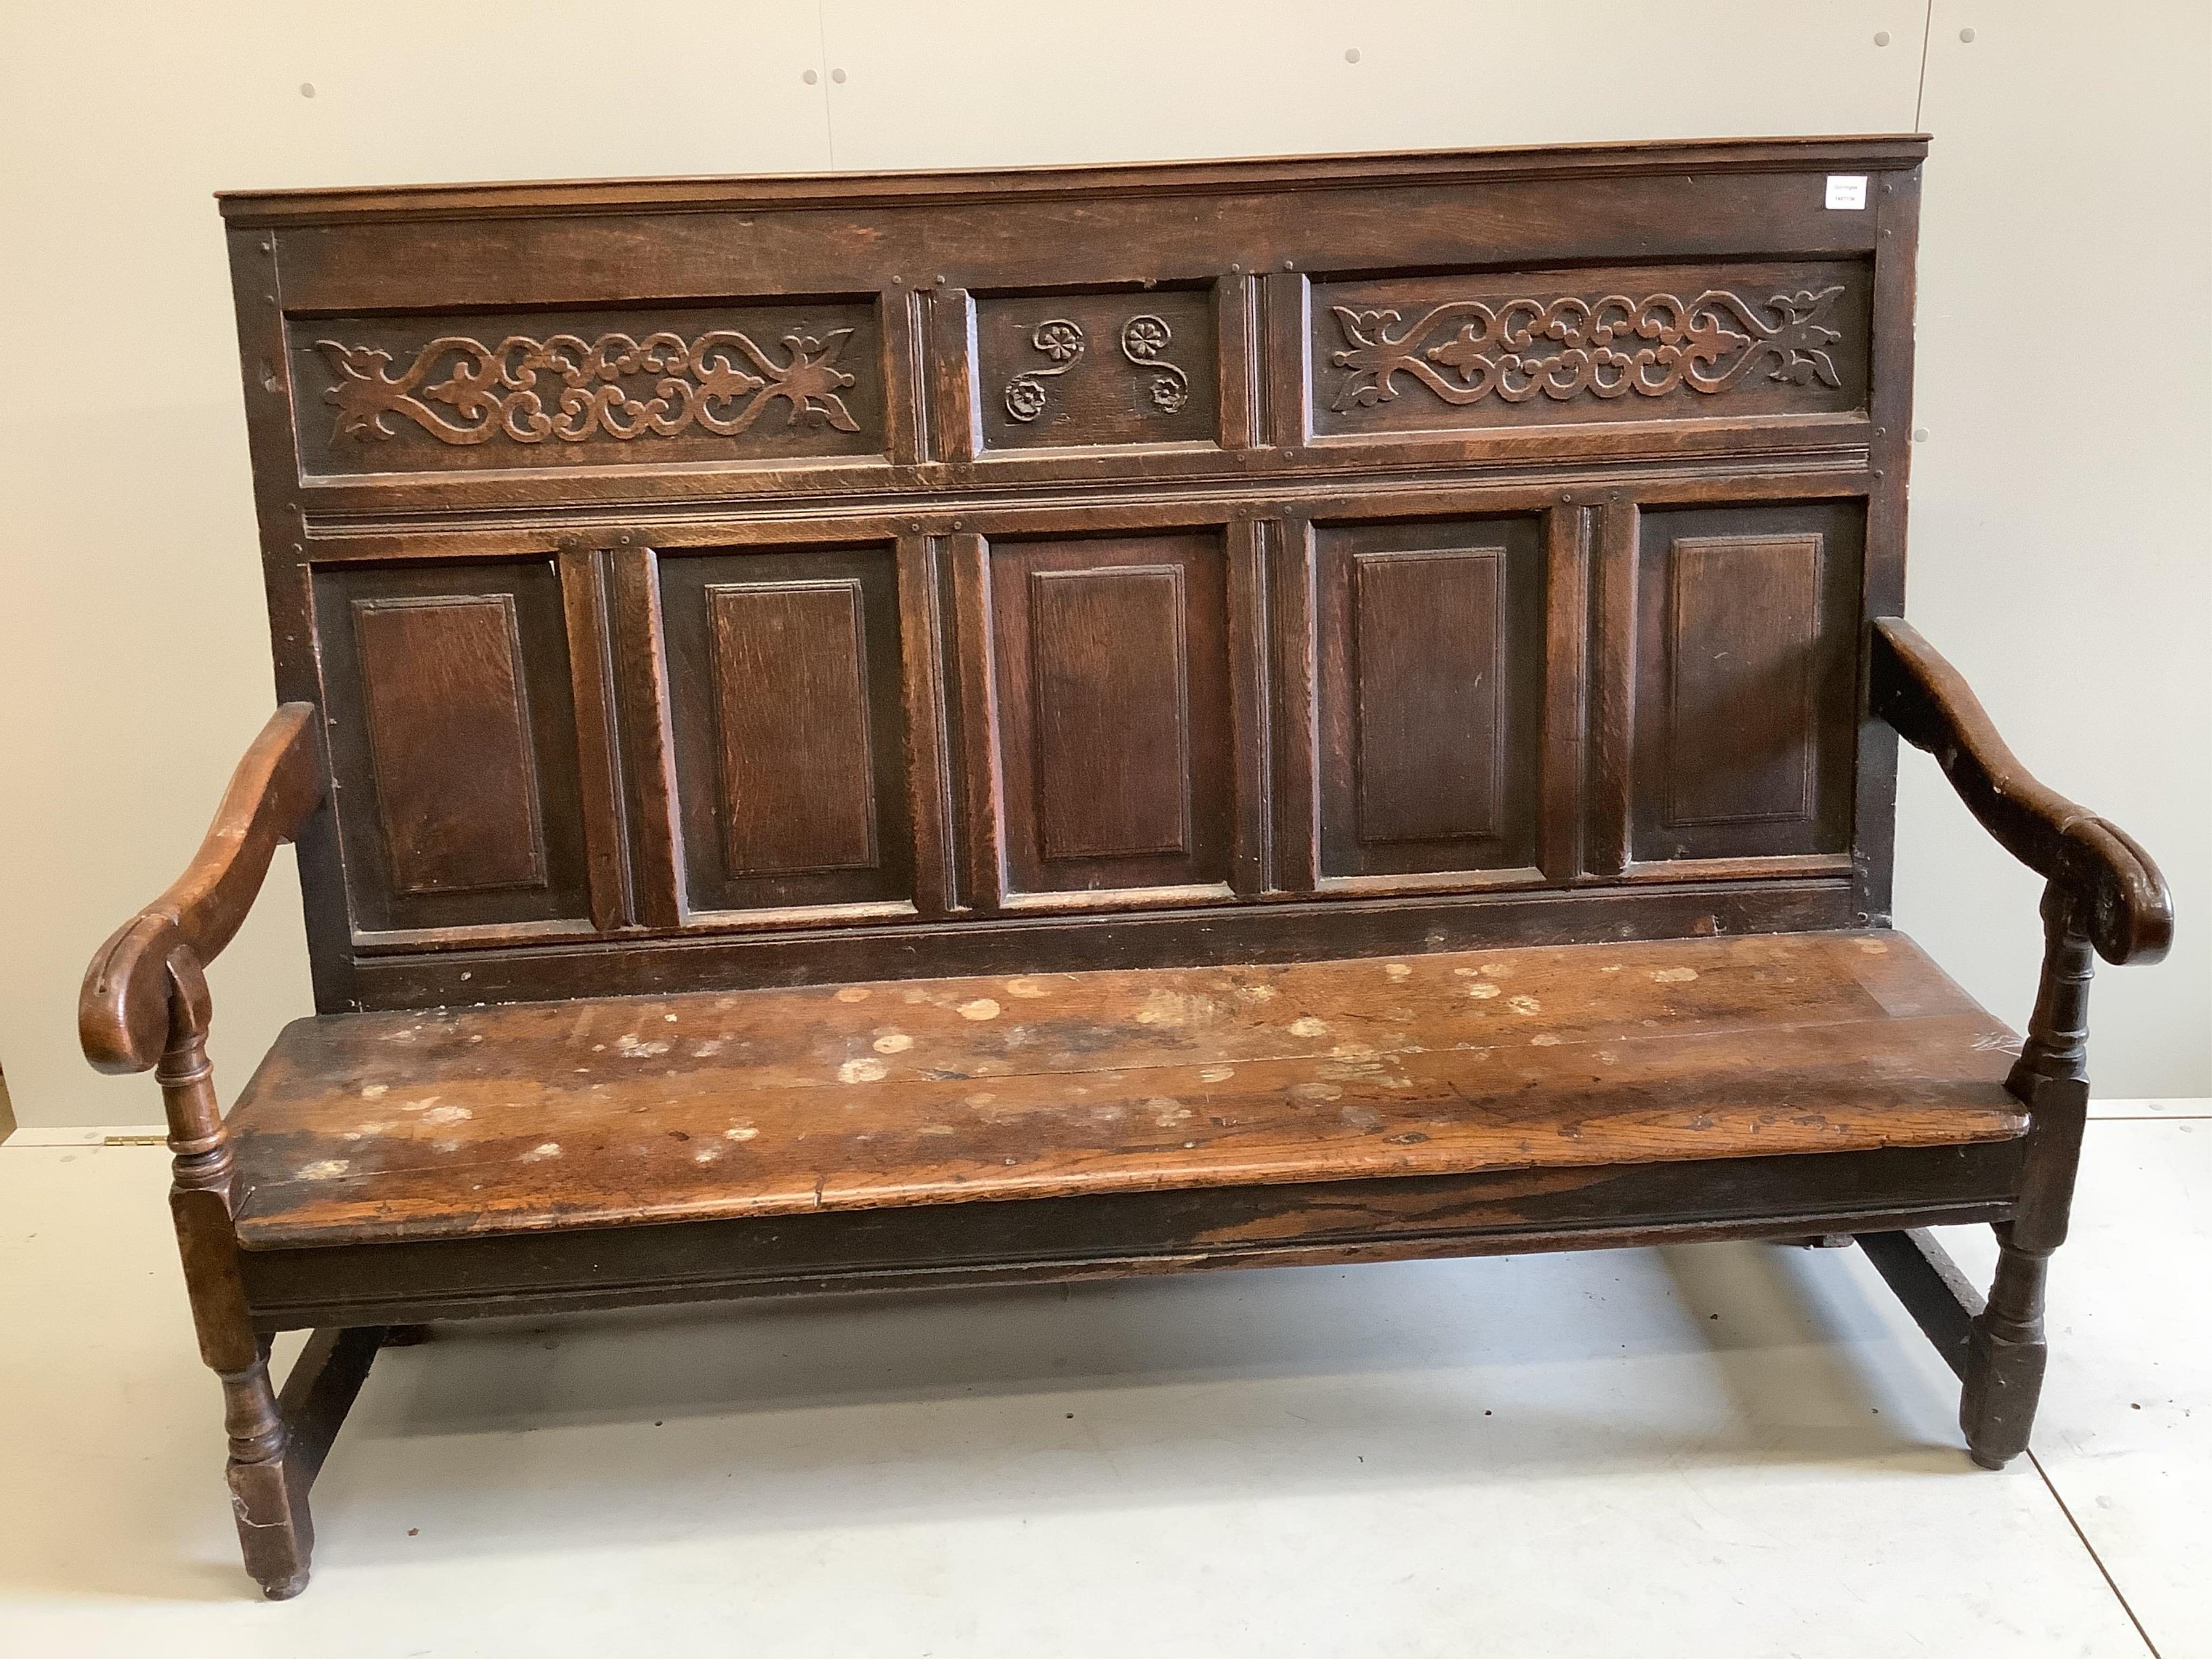 A mid 18th century carved oak settle, width 171cm, depth 58cm, height 122cm. Condition - poor to fair